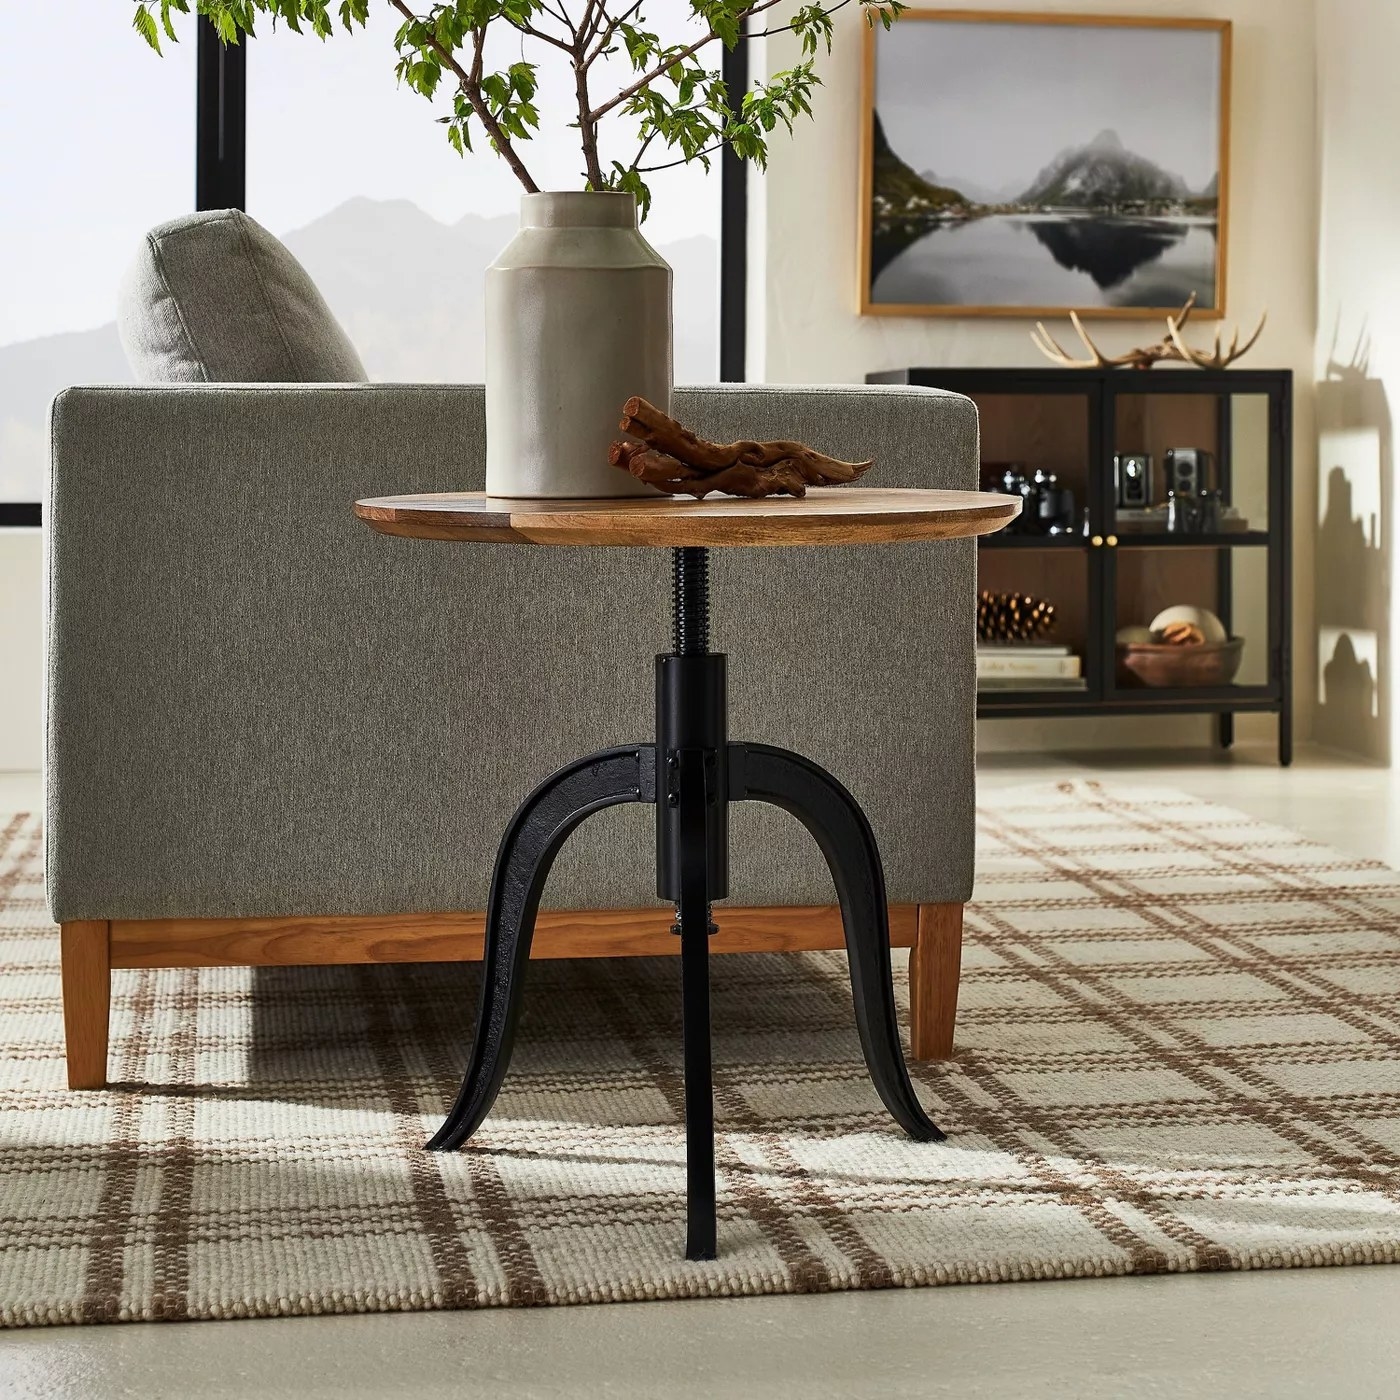 The round table with curved metal legs in a living room